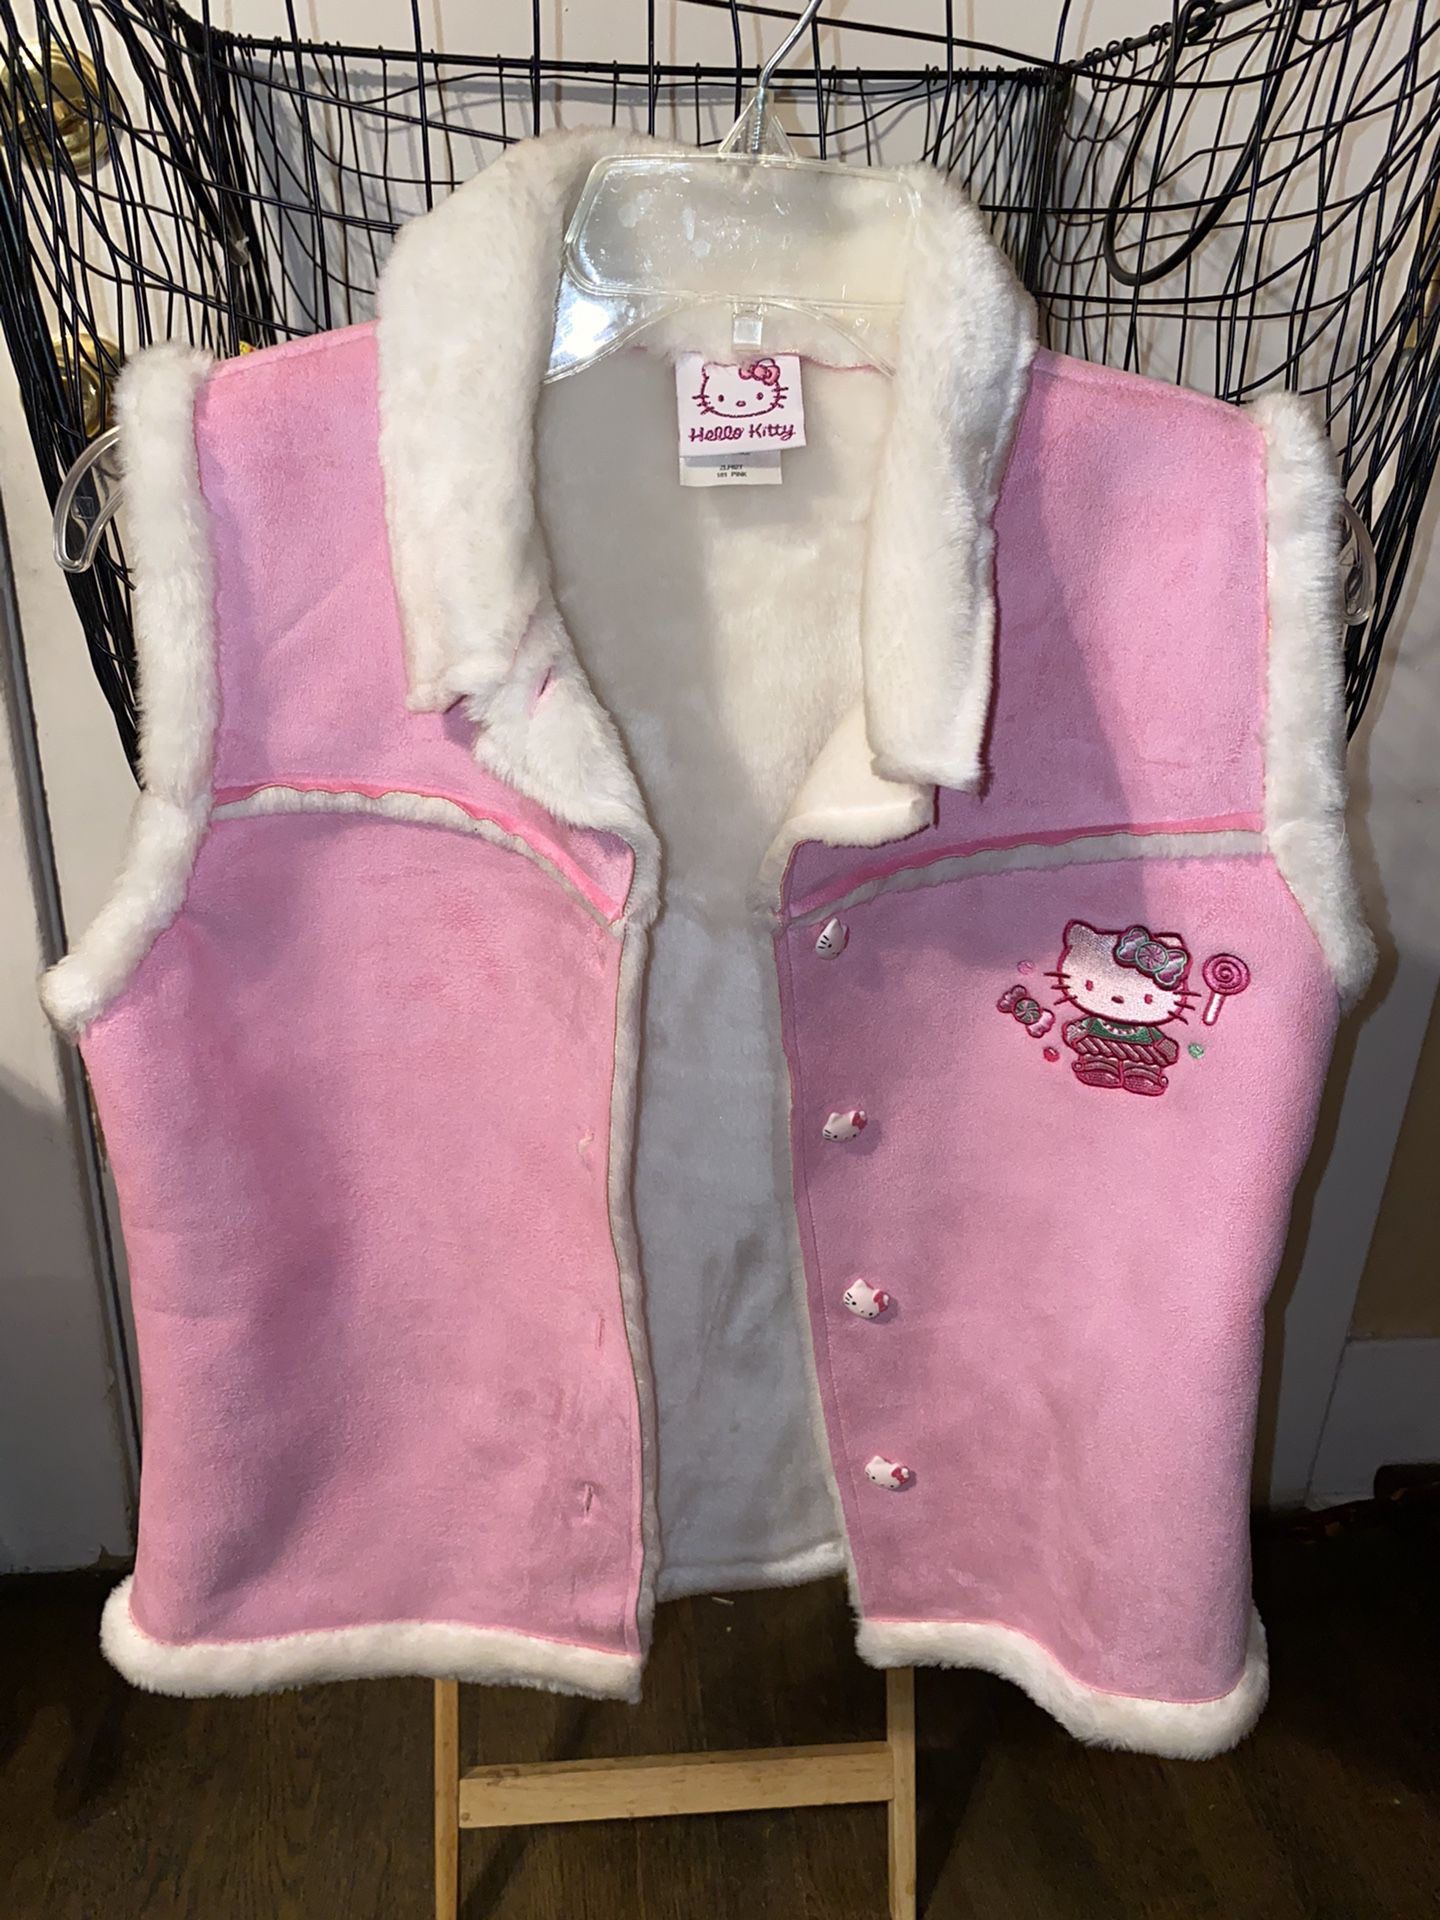 Sweater vest girls XL youth size (15-17)